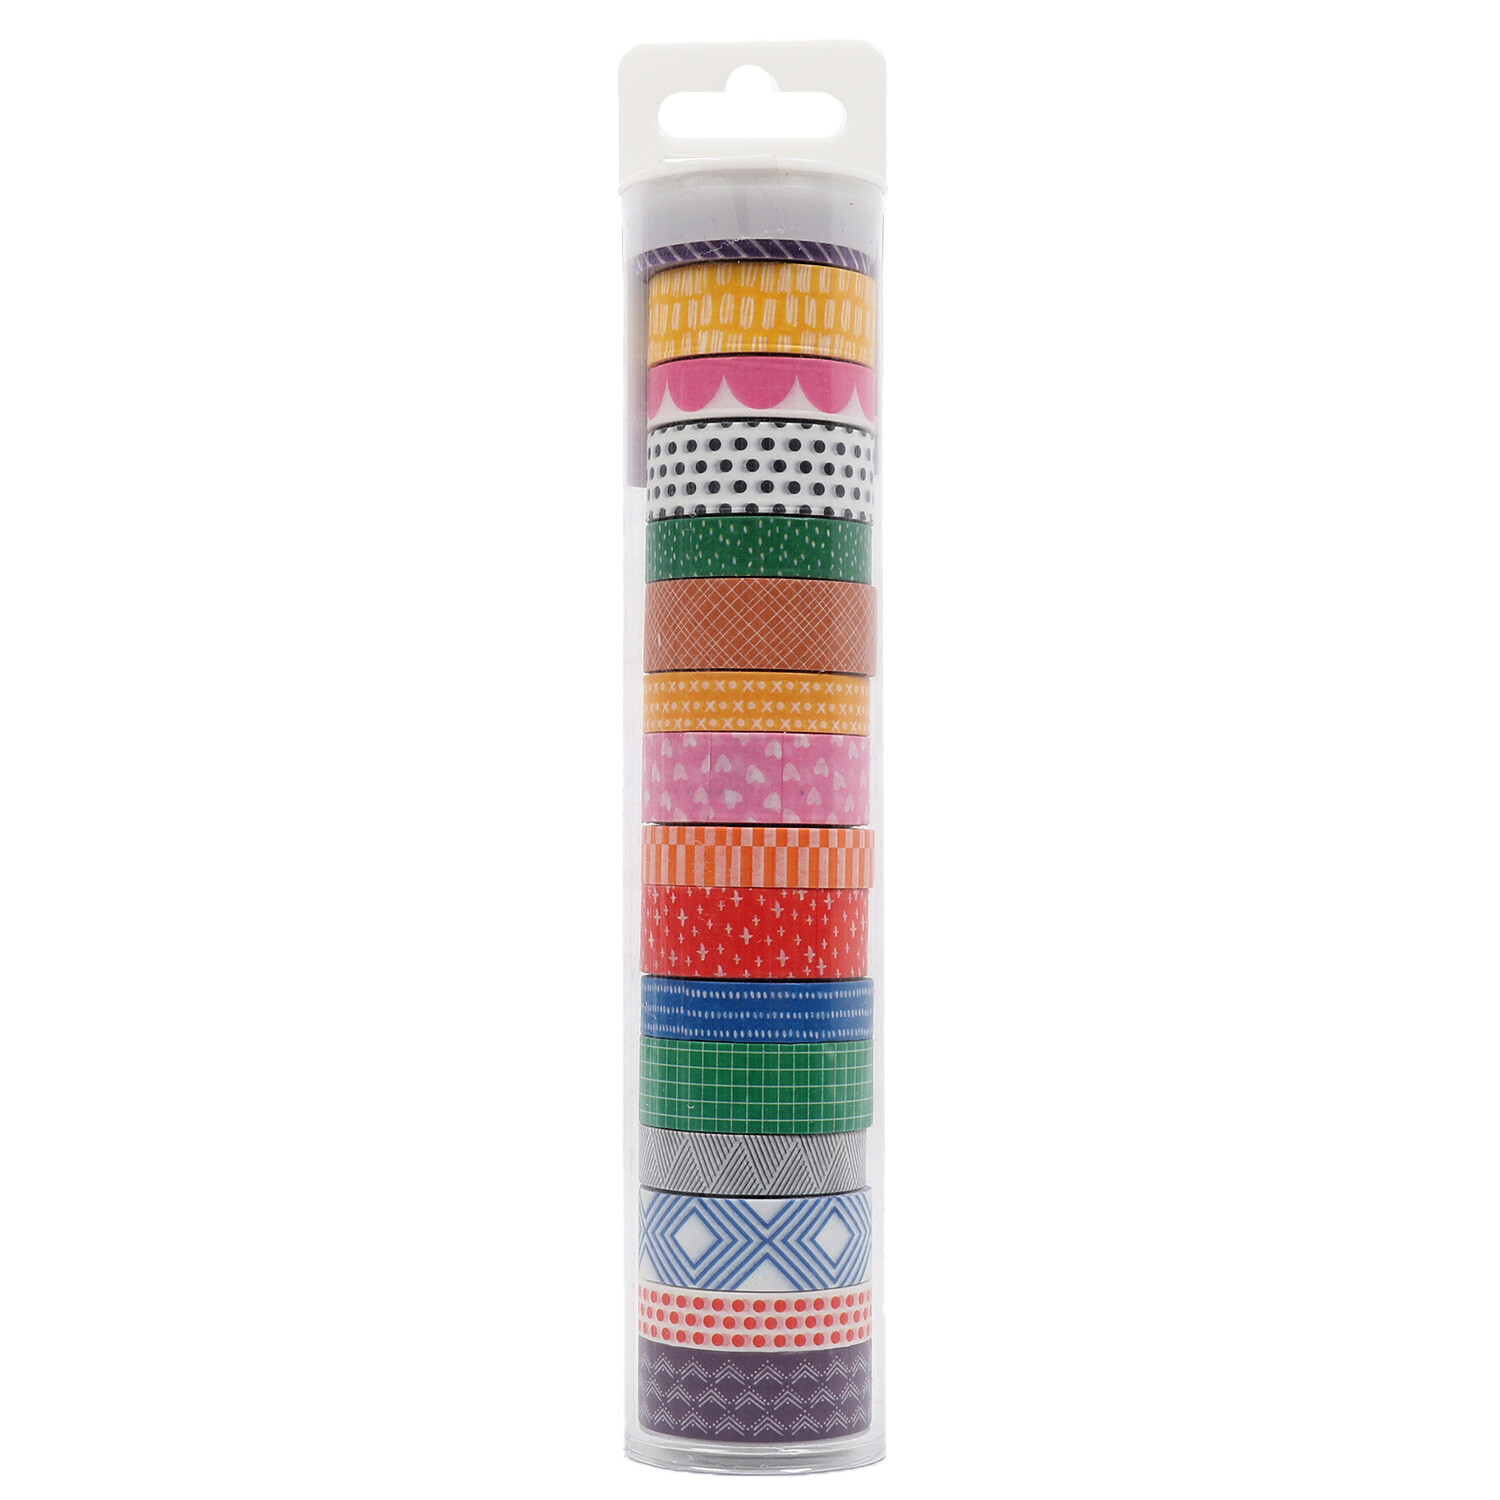 Ombre or Patterned Washi Tape Image 2